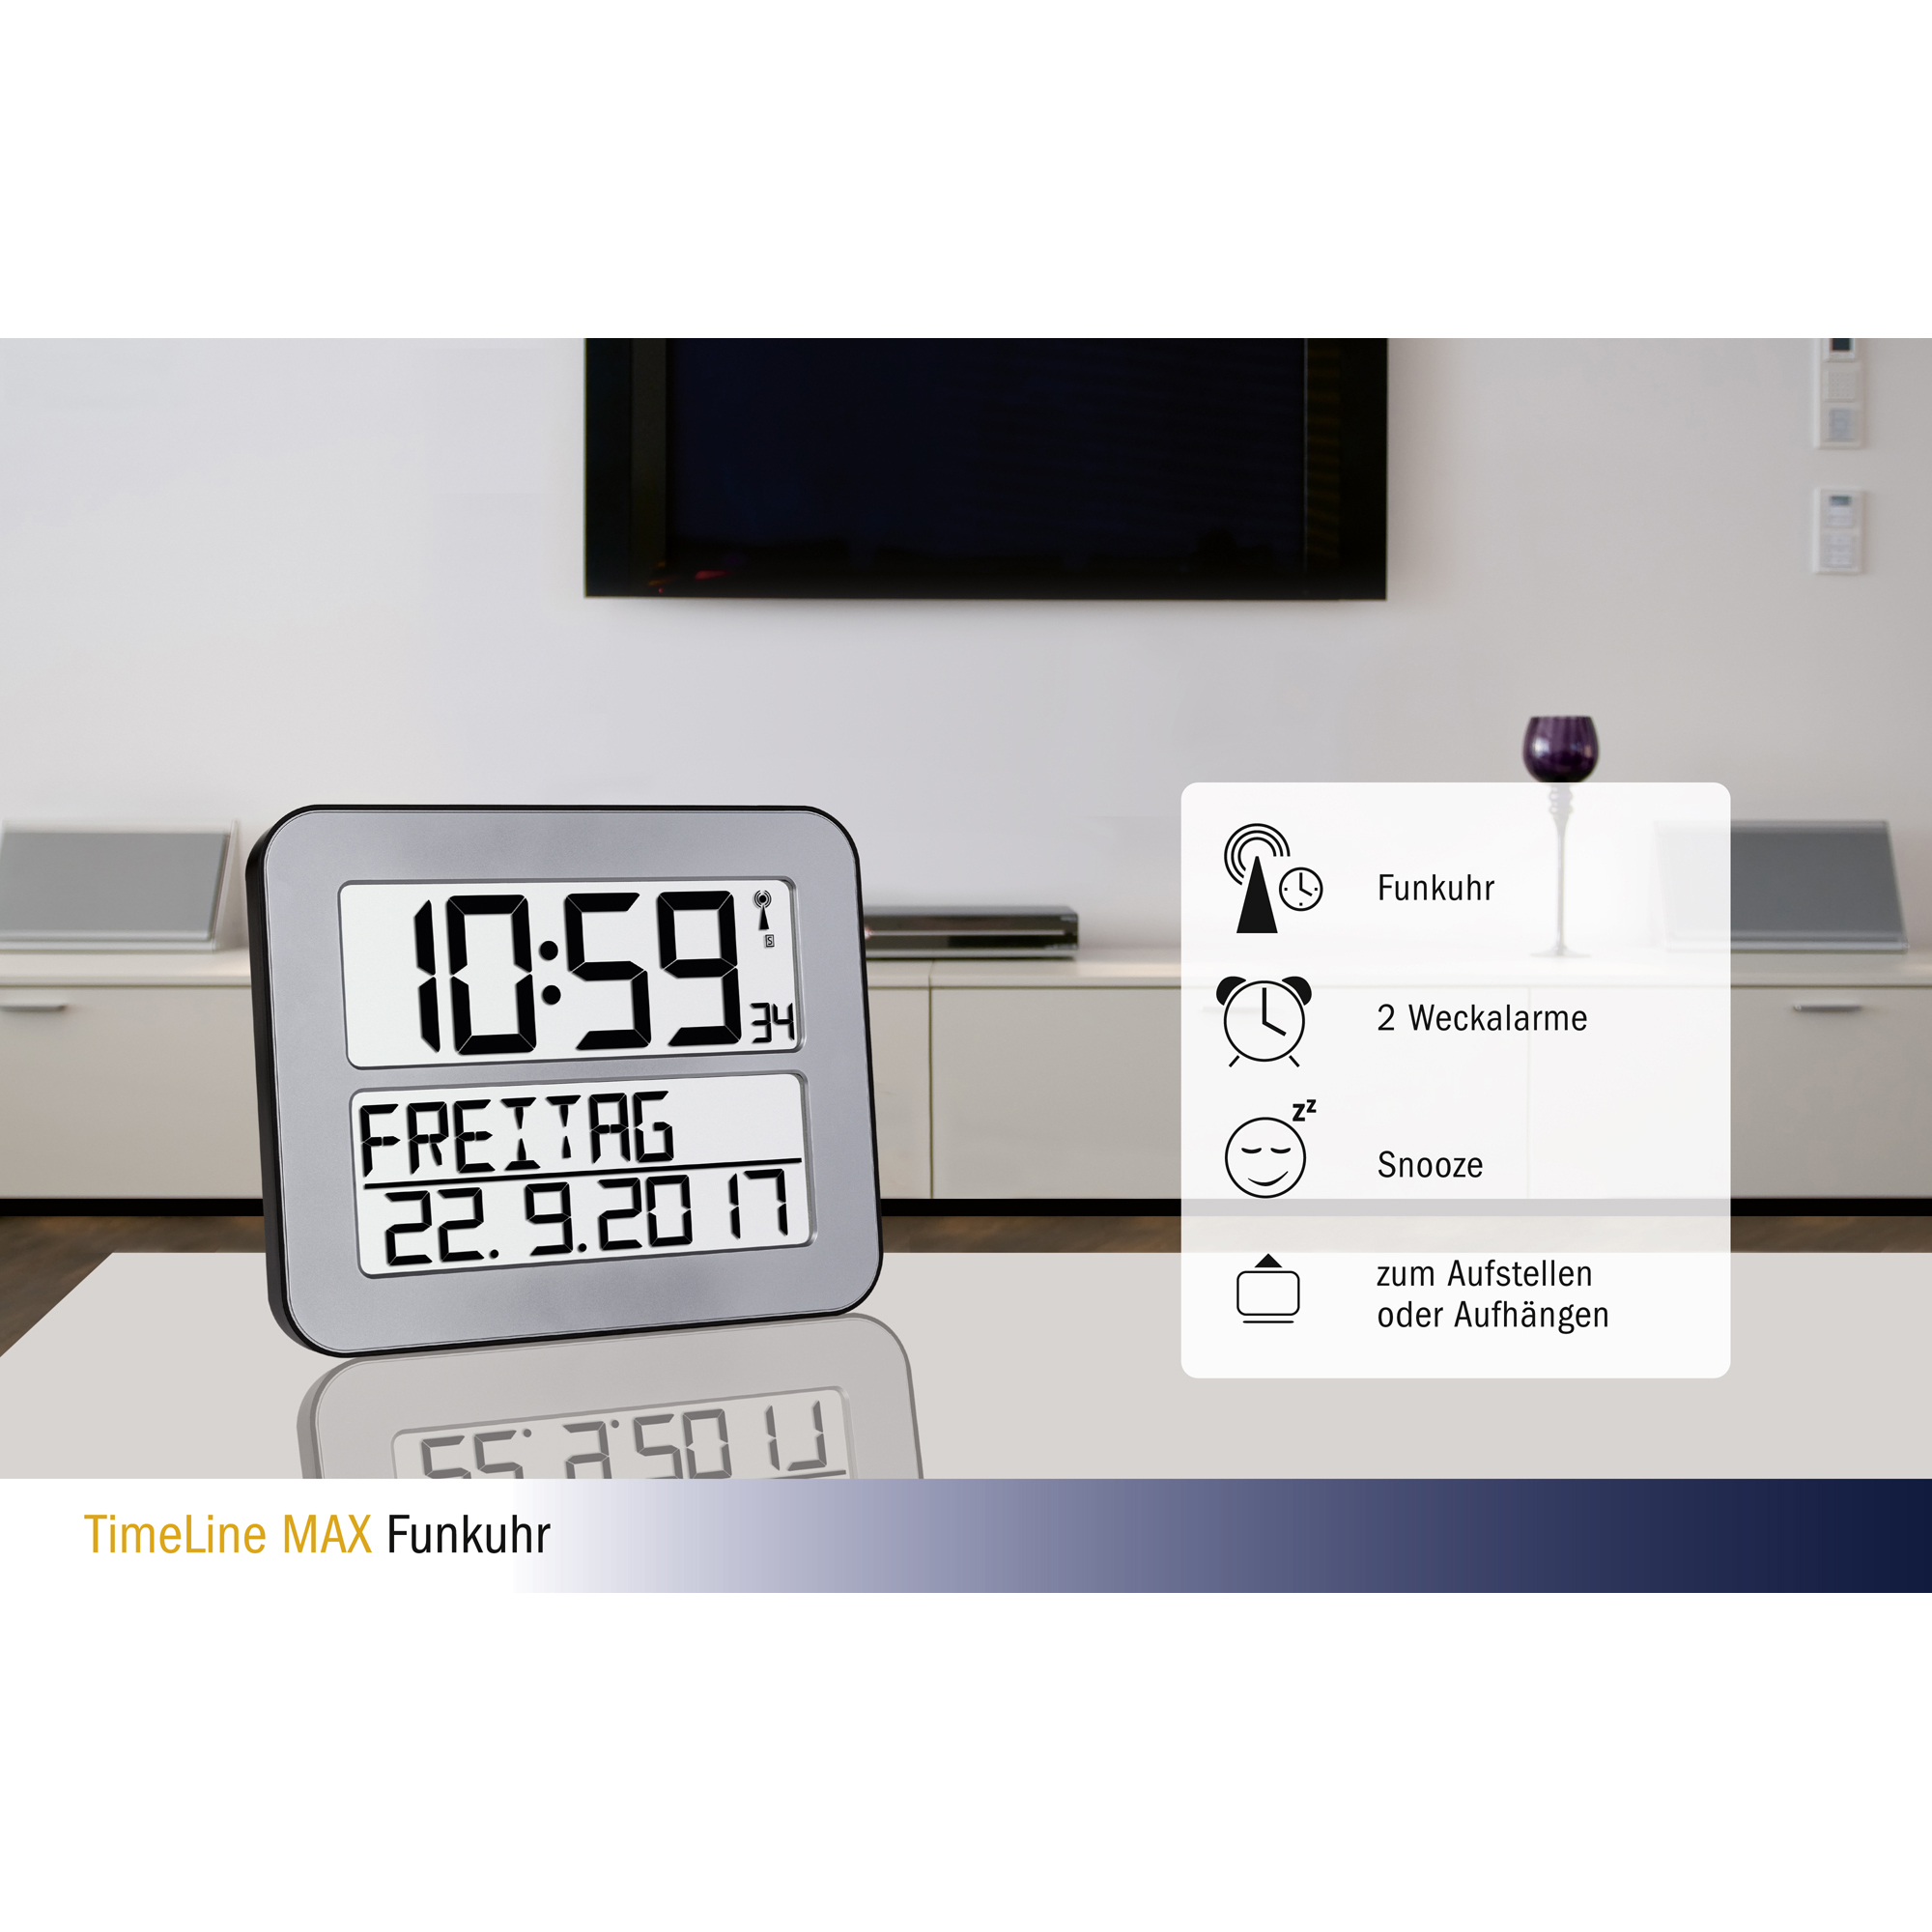 TFA Dostmann "Time Line" Radio Clock with Temperature display the indoor temperature NEW